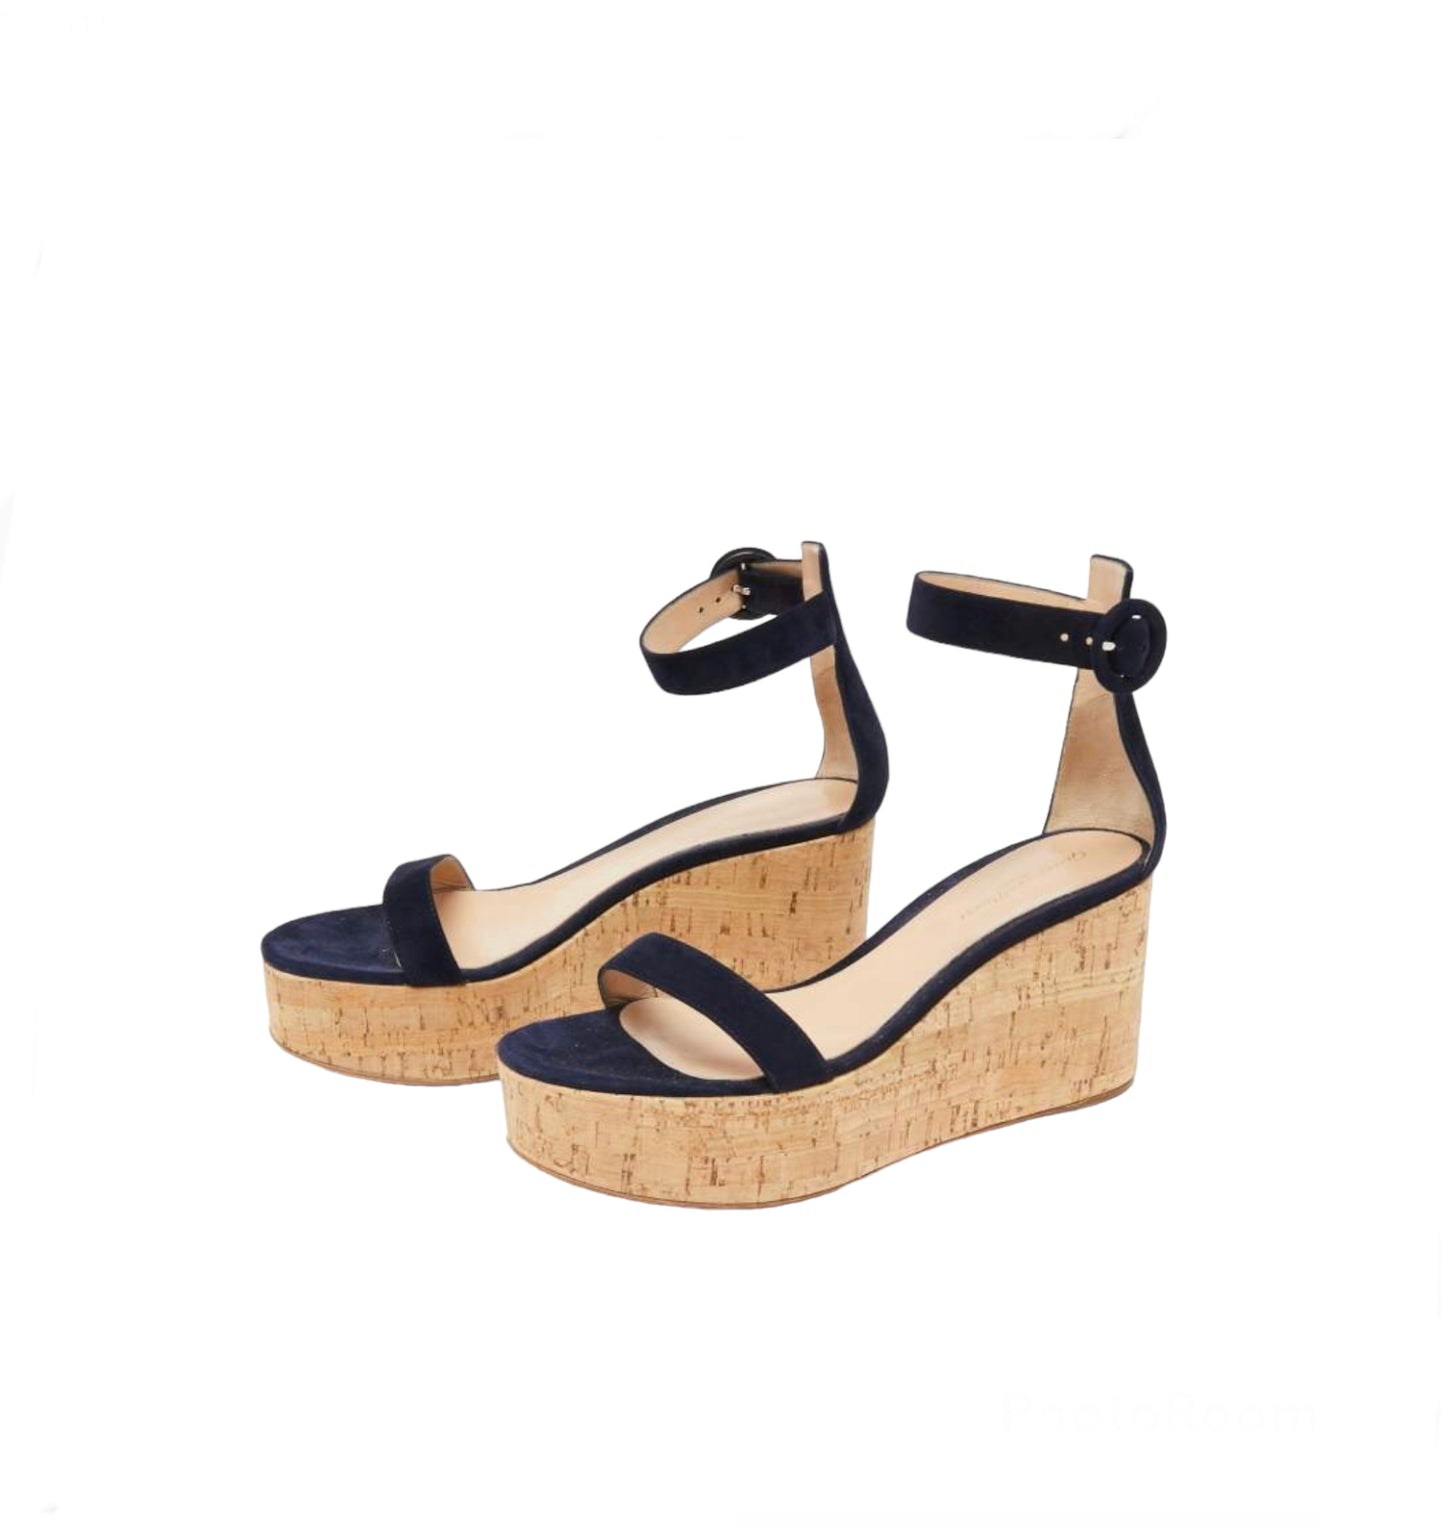 Load image into Gallery viewer, Gianvitto Rossi Navy Cork Wedges - new
